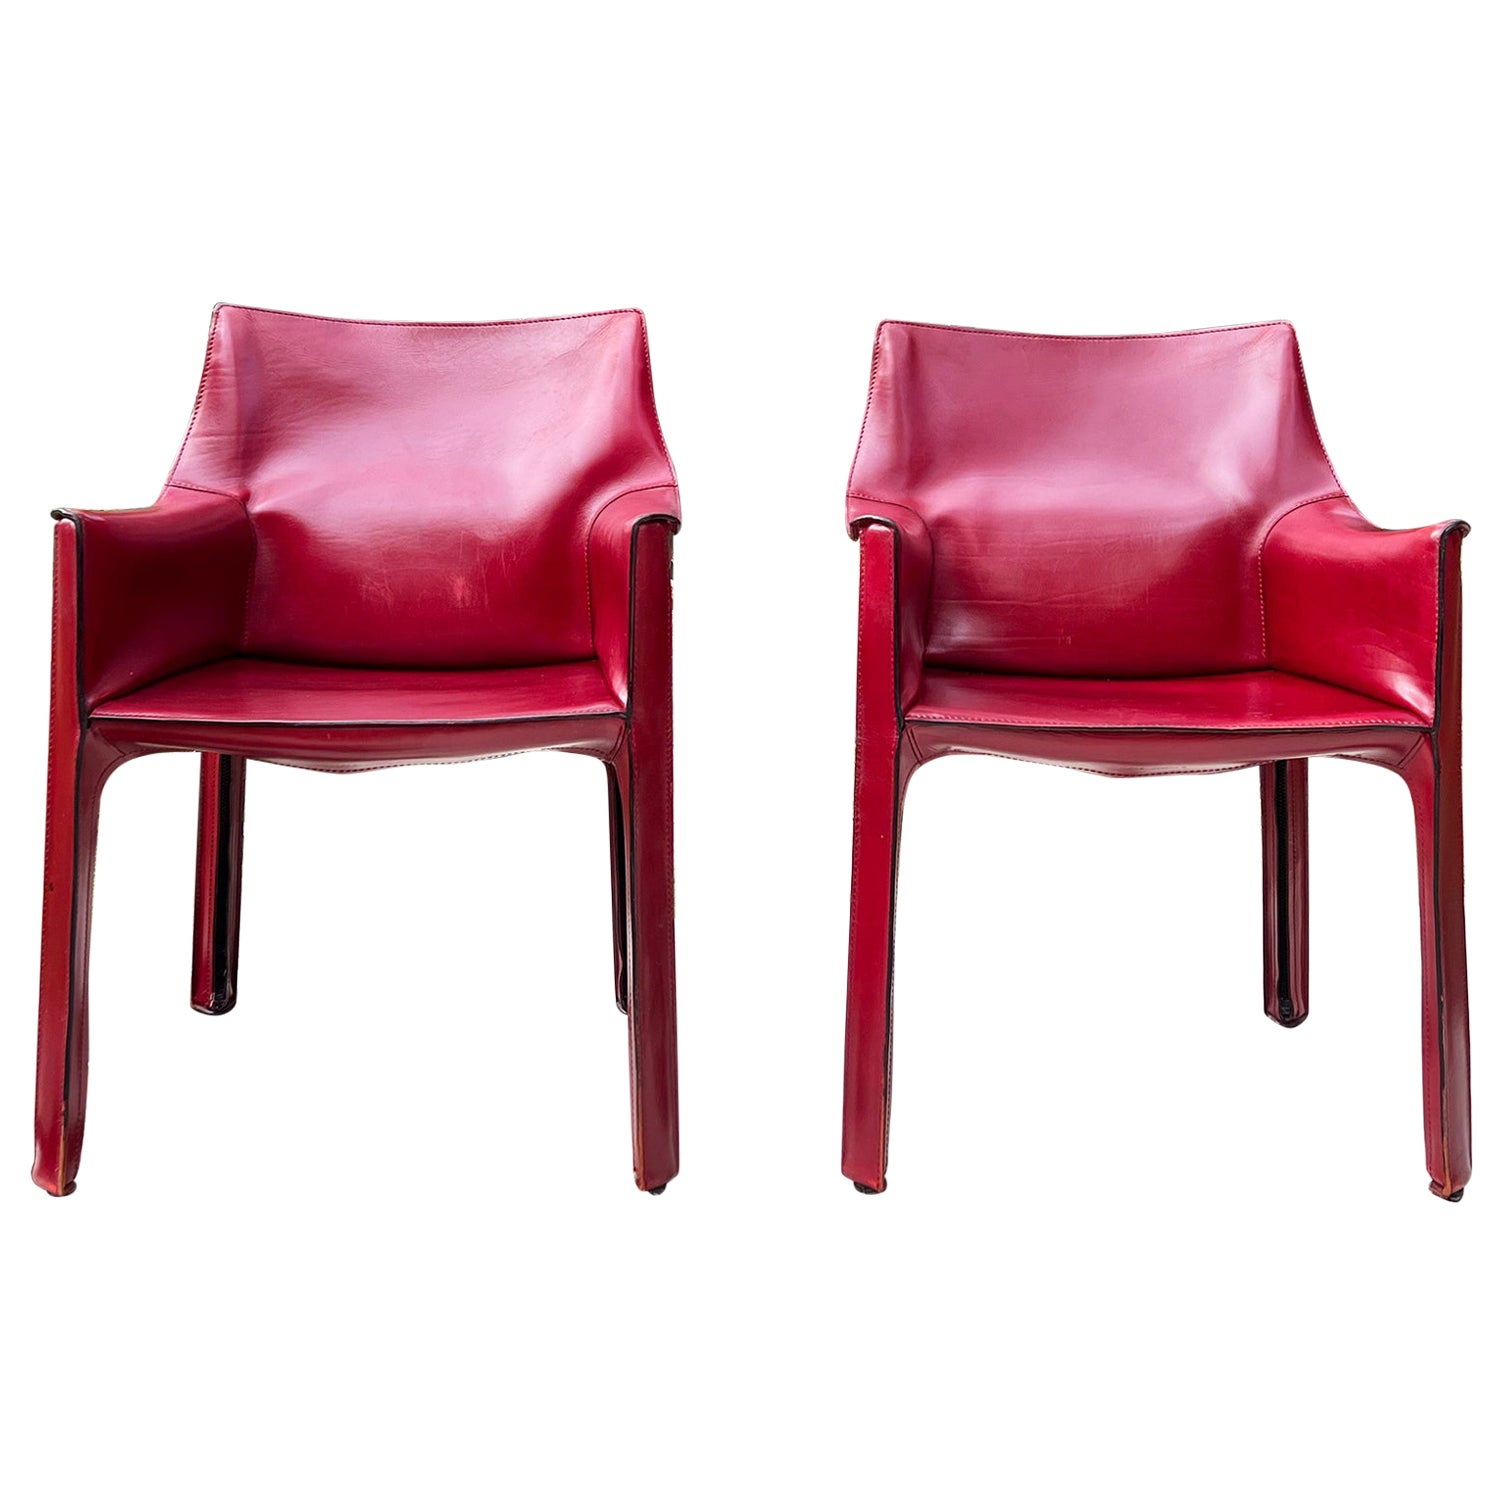 Cassina Cab 414 Armchairs PAIR by Mario Bellini in Gorgeous Oxblood Red Leather For Sale